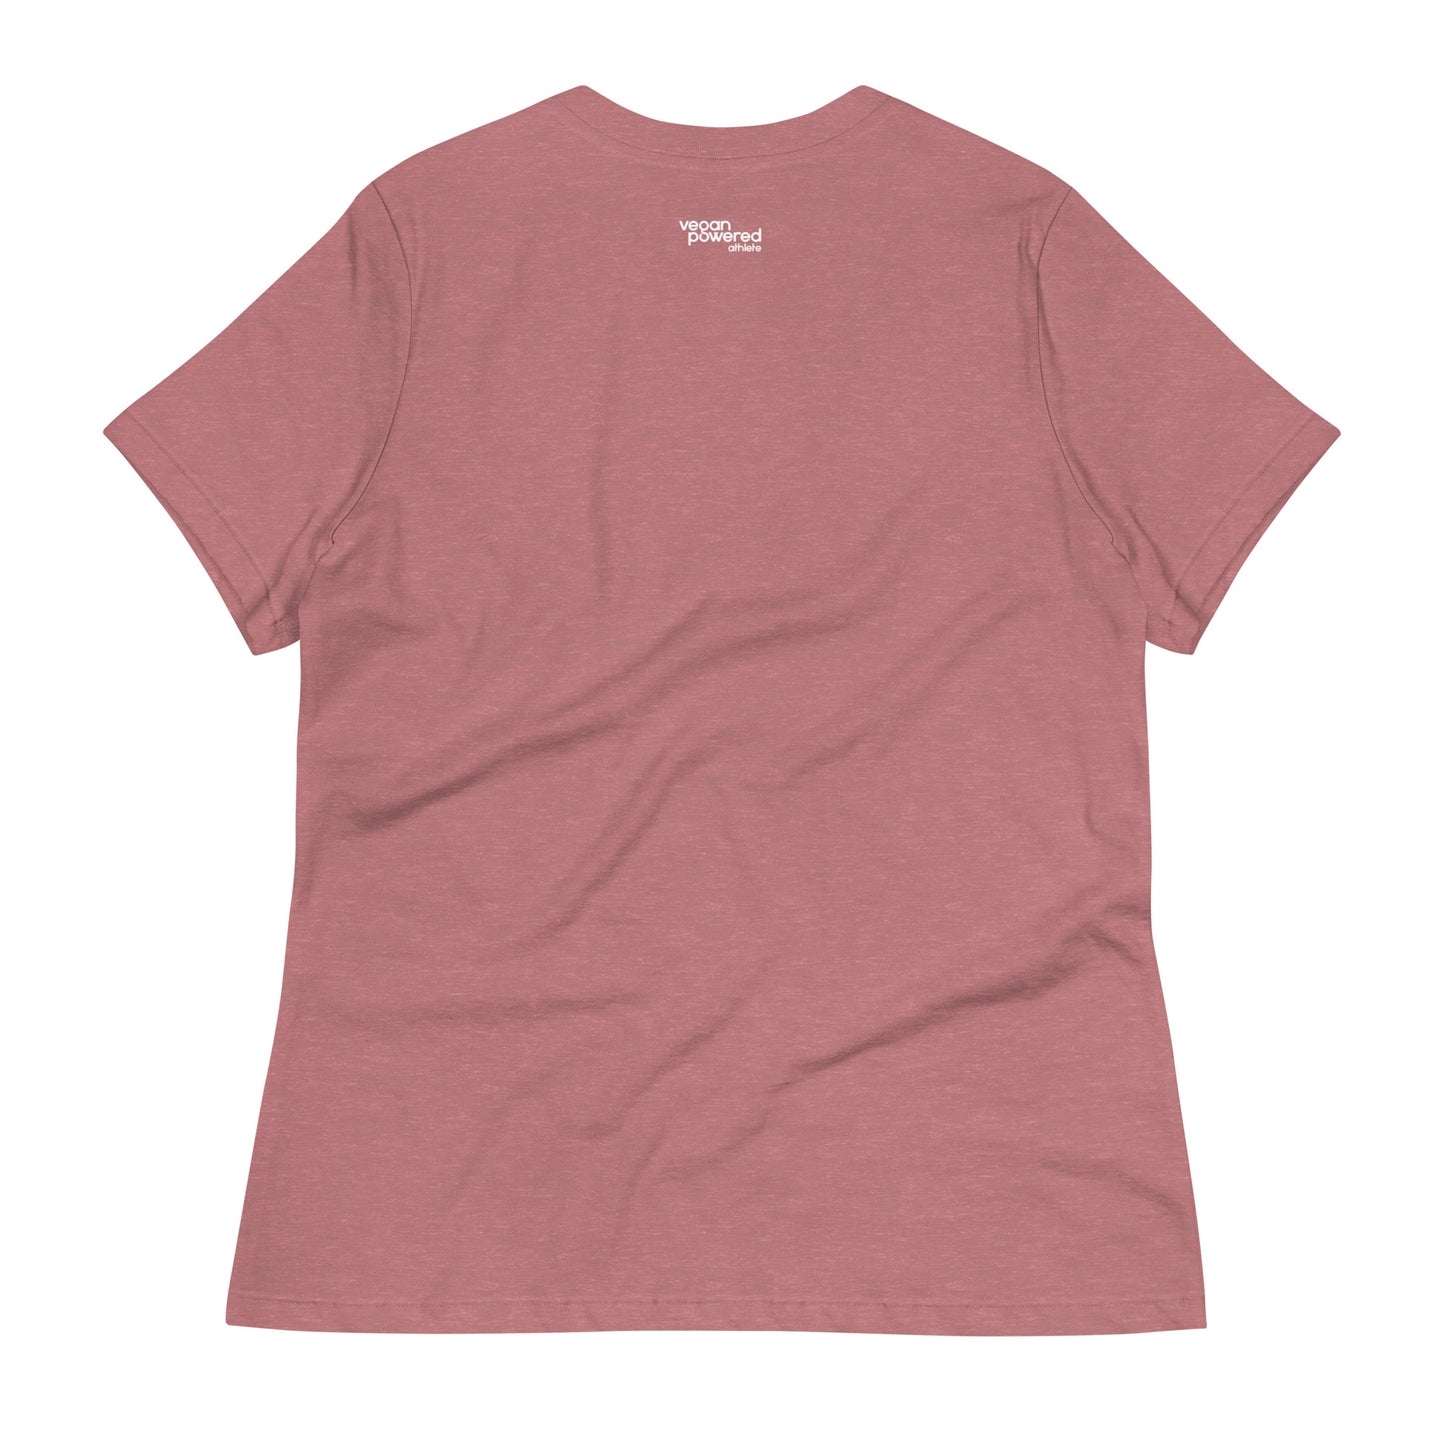 Load image into Gallery viewer, VPA Women&amp;#39;s Relaxed T-Shirt
